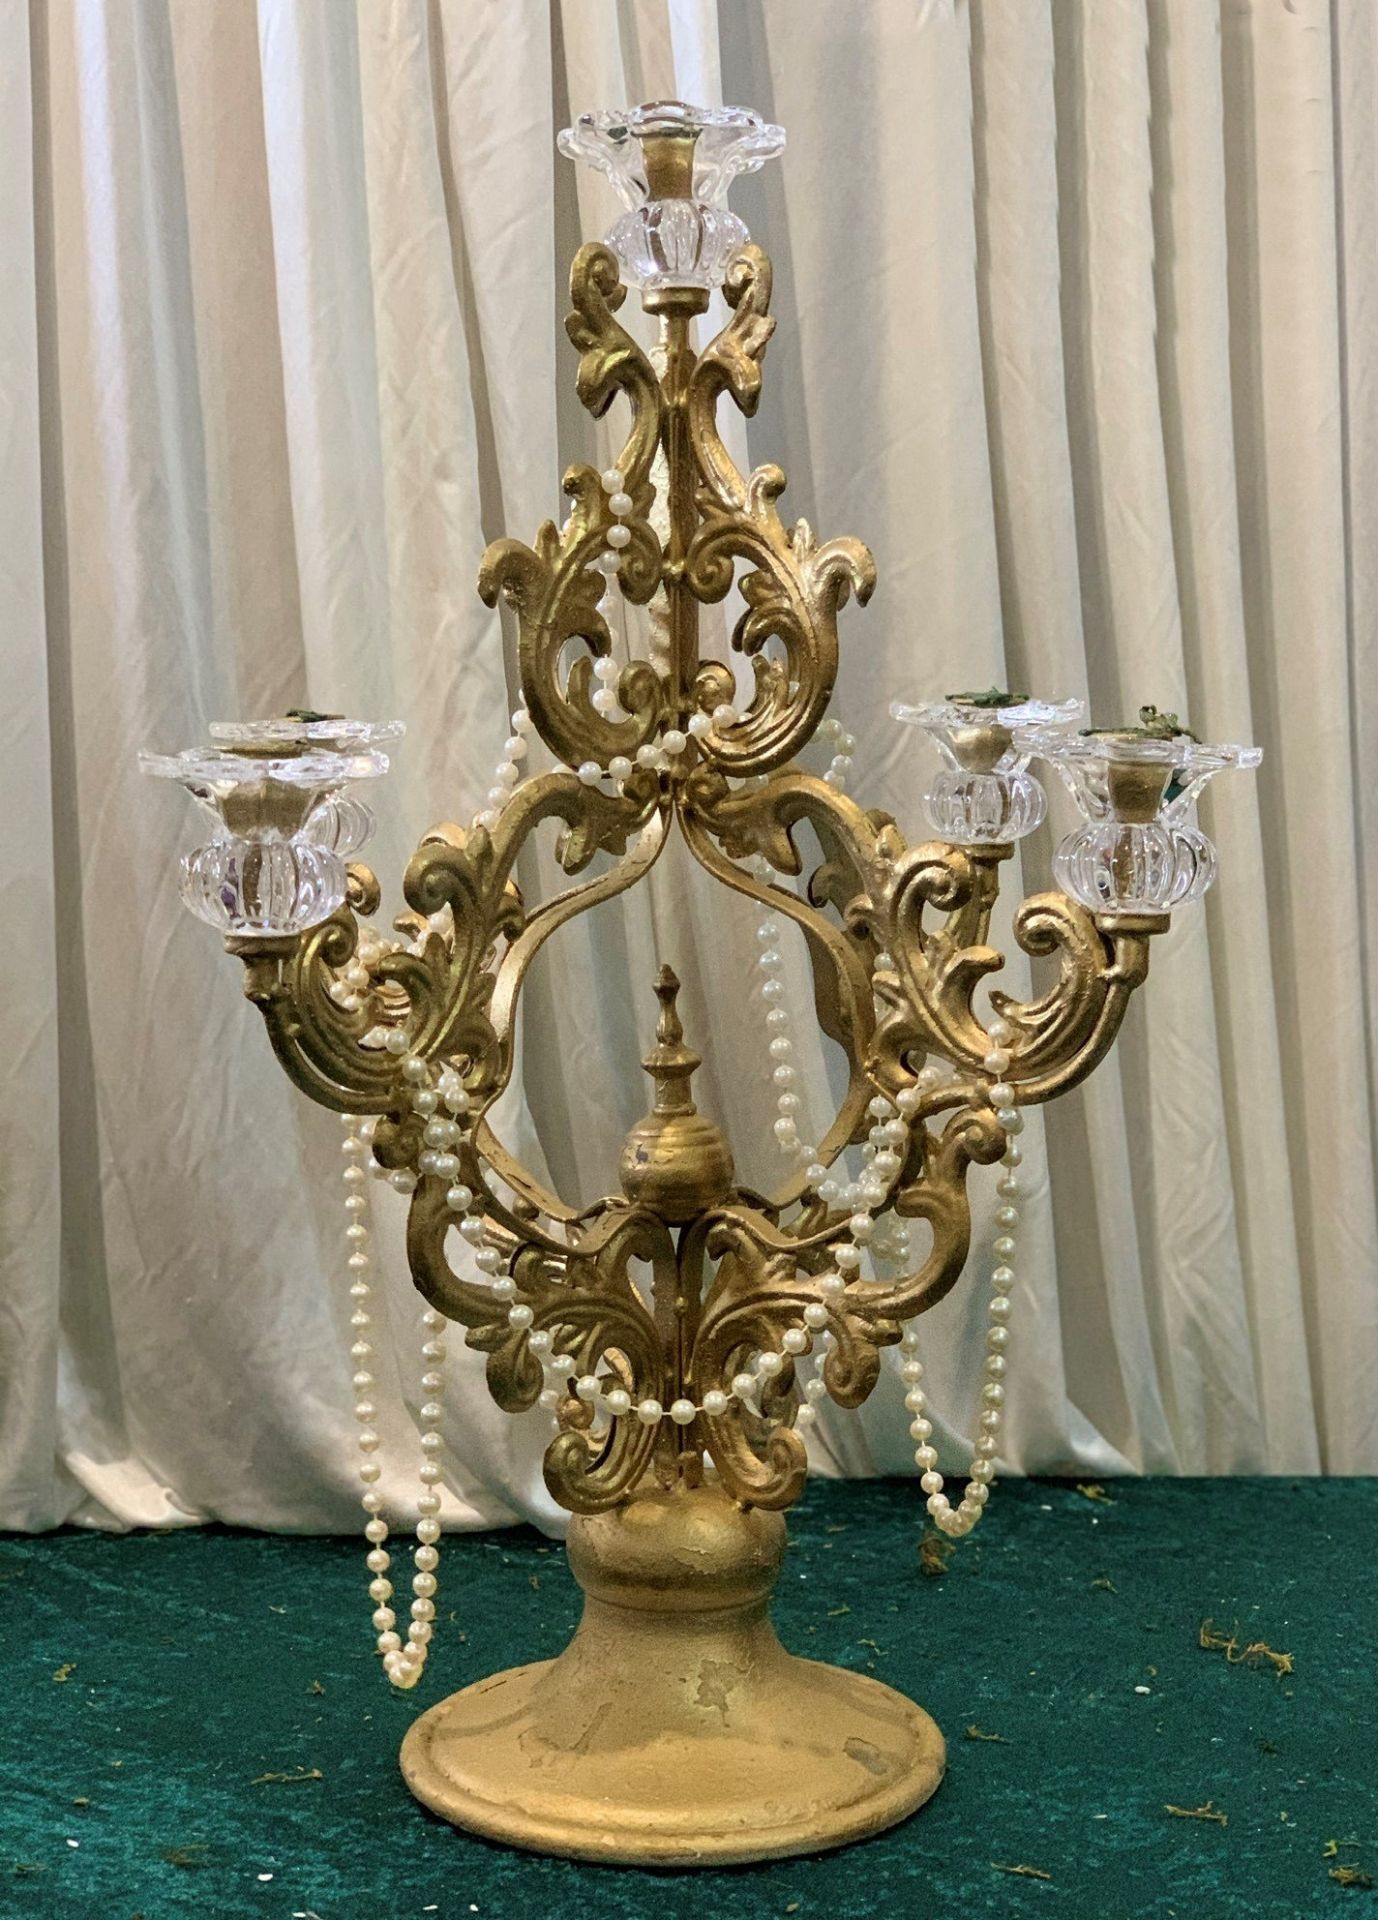 5 x Antique Gold Candlestands - Dimensions: 57x34cm - Ref: Lot 64 - CL548 - Location: Leicester